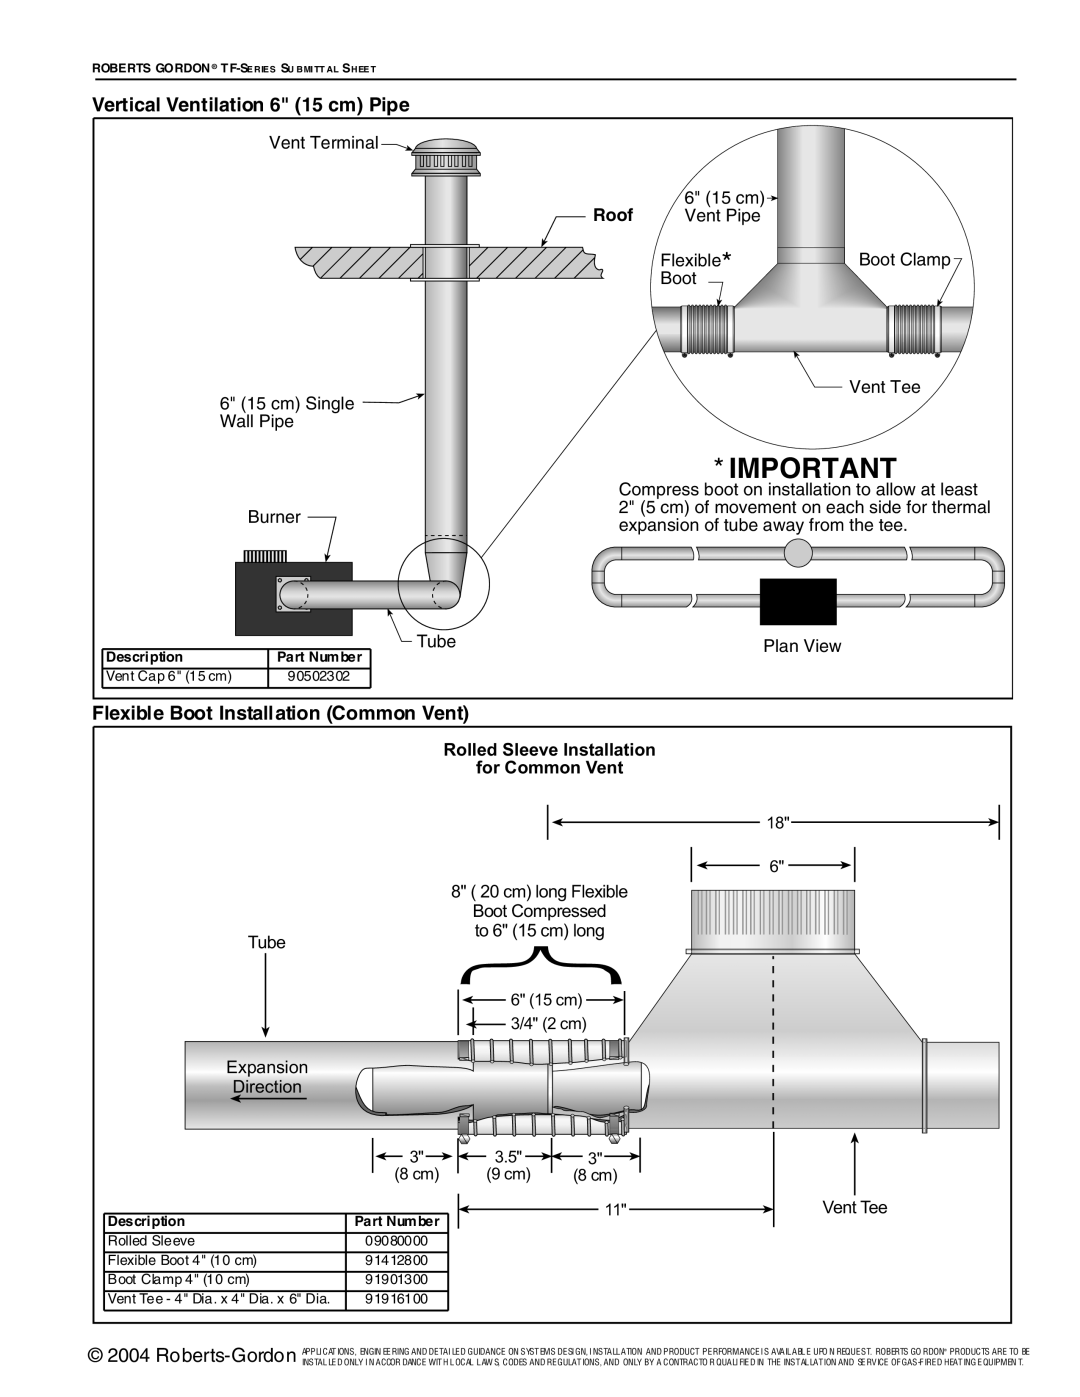 Roberts Gorden TF-Series service manual Vertical Ventilation 6 15 cm Pipe, Flexible Boot Installation Common Vent, Roof 